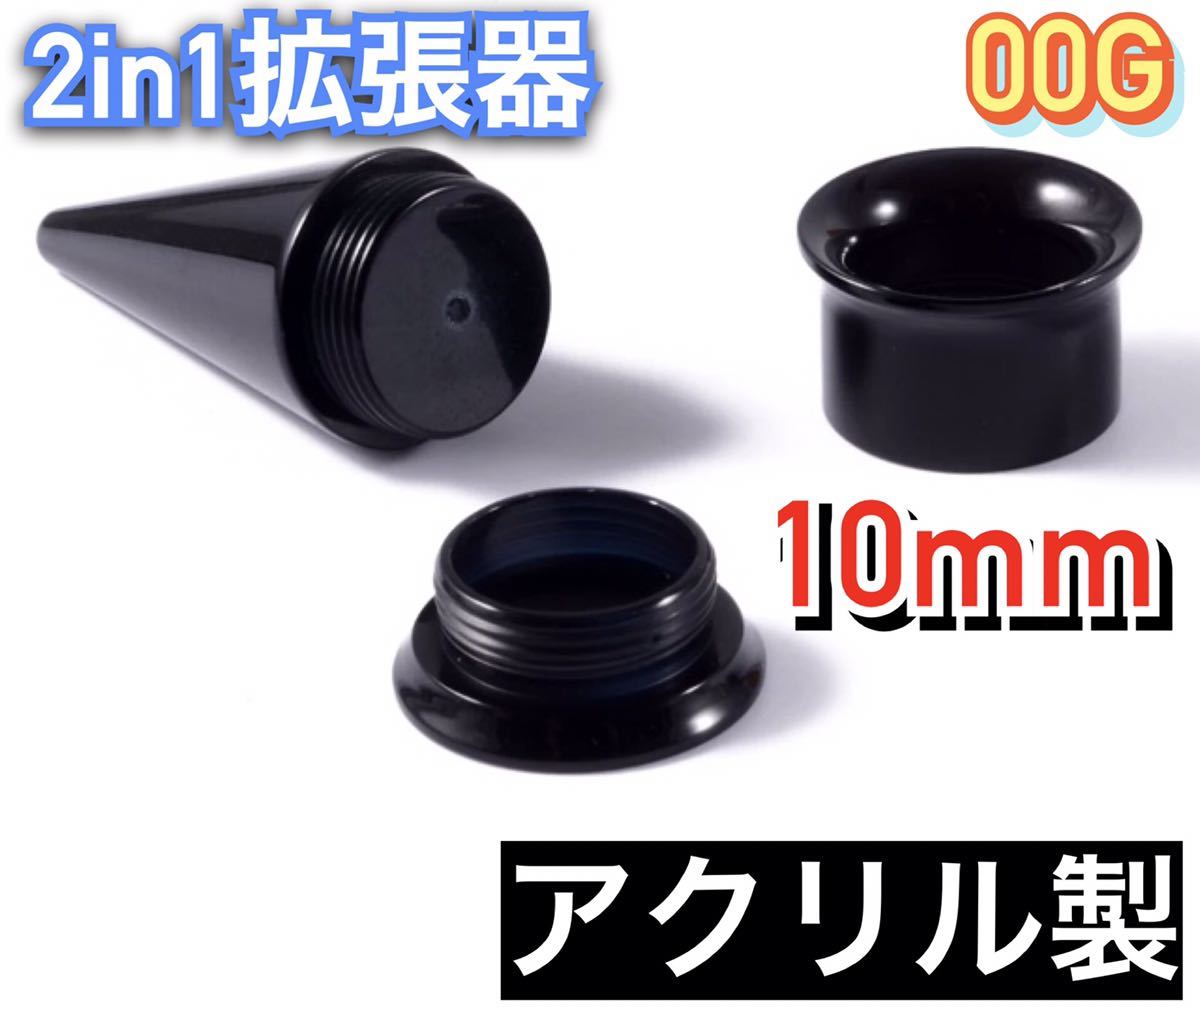 SALE／58%OFF】 11mm×1セット 2in1 拡張器 ネジ式 ダブルフレア ボディピアス